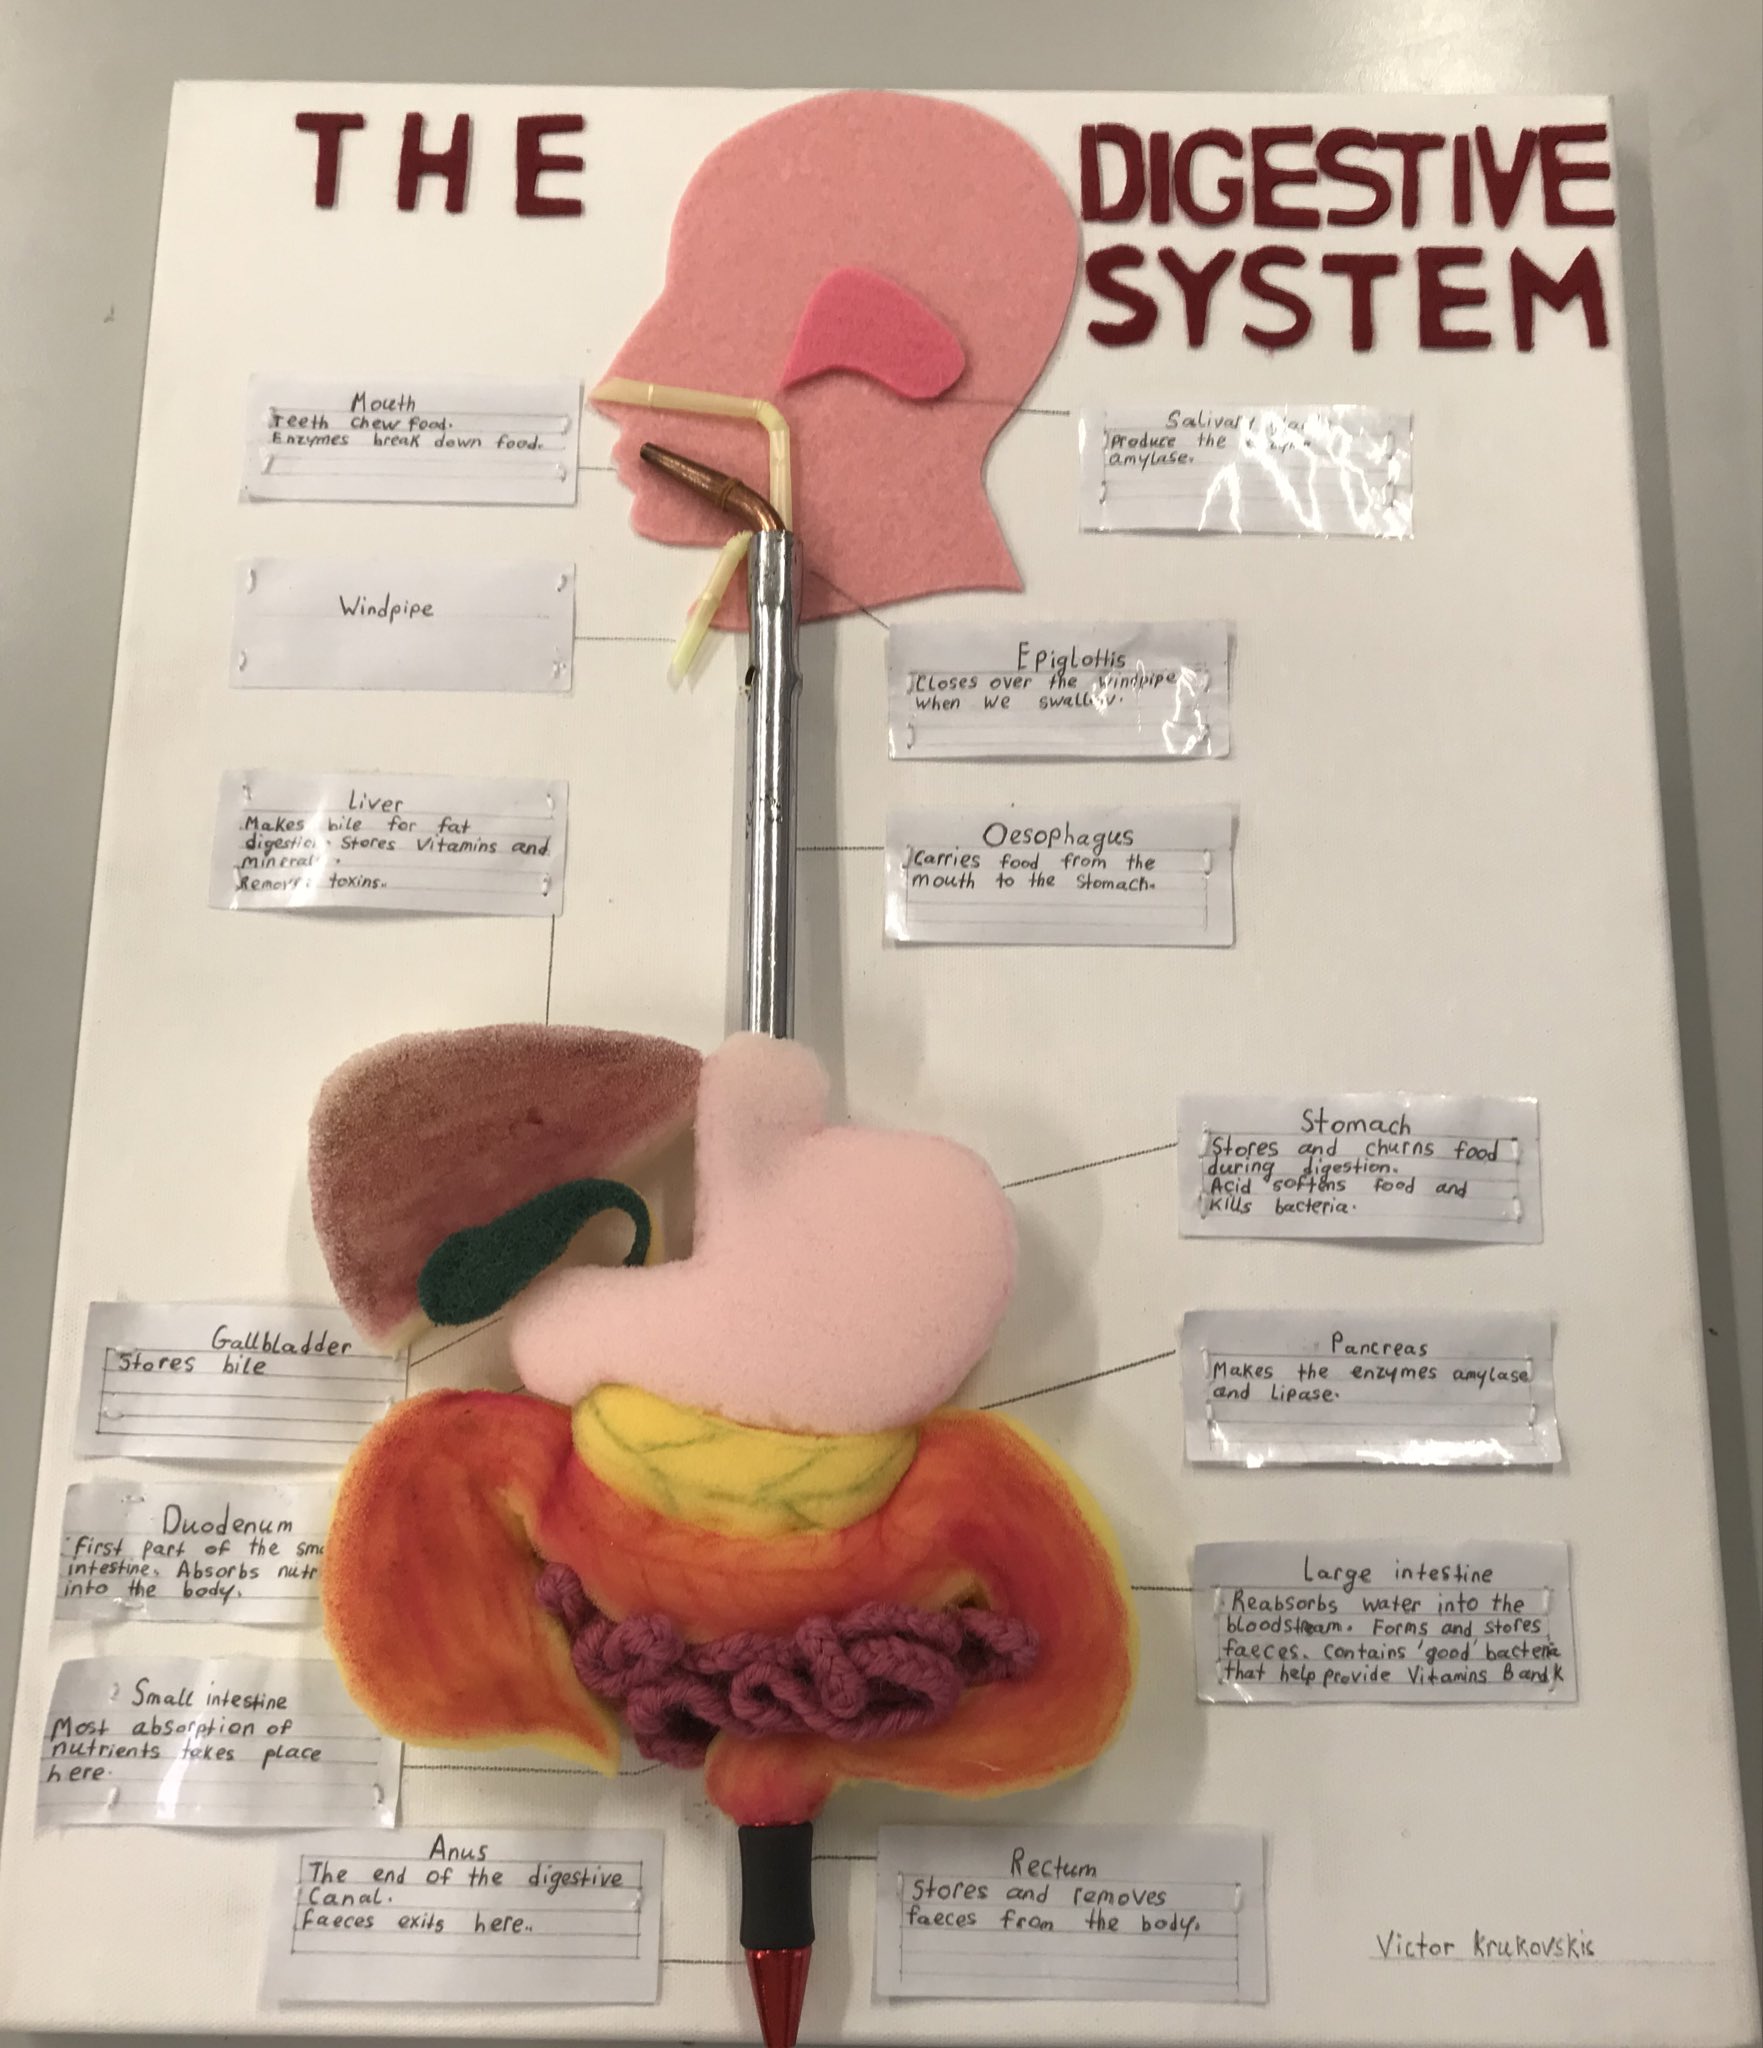 Mullingar Community College on Twitter: "Some fantastic 3D models of the Digestive  System created by first year science students. 🧪🧫🧫🦠🌡🚀#WeAreLWETB  #science https://t.co/95lbo89dC8" / Twitter